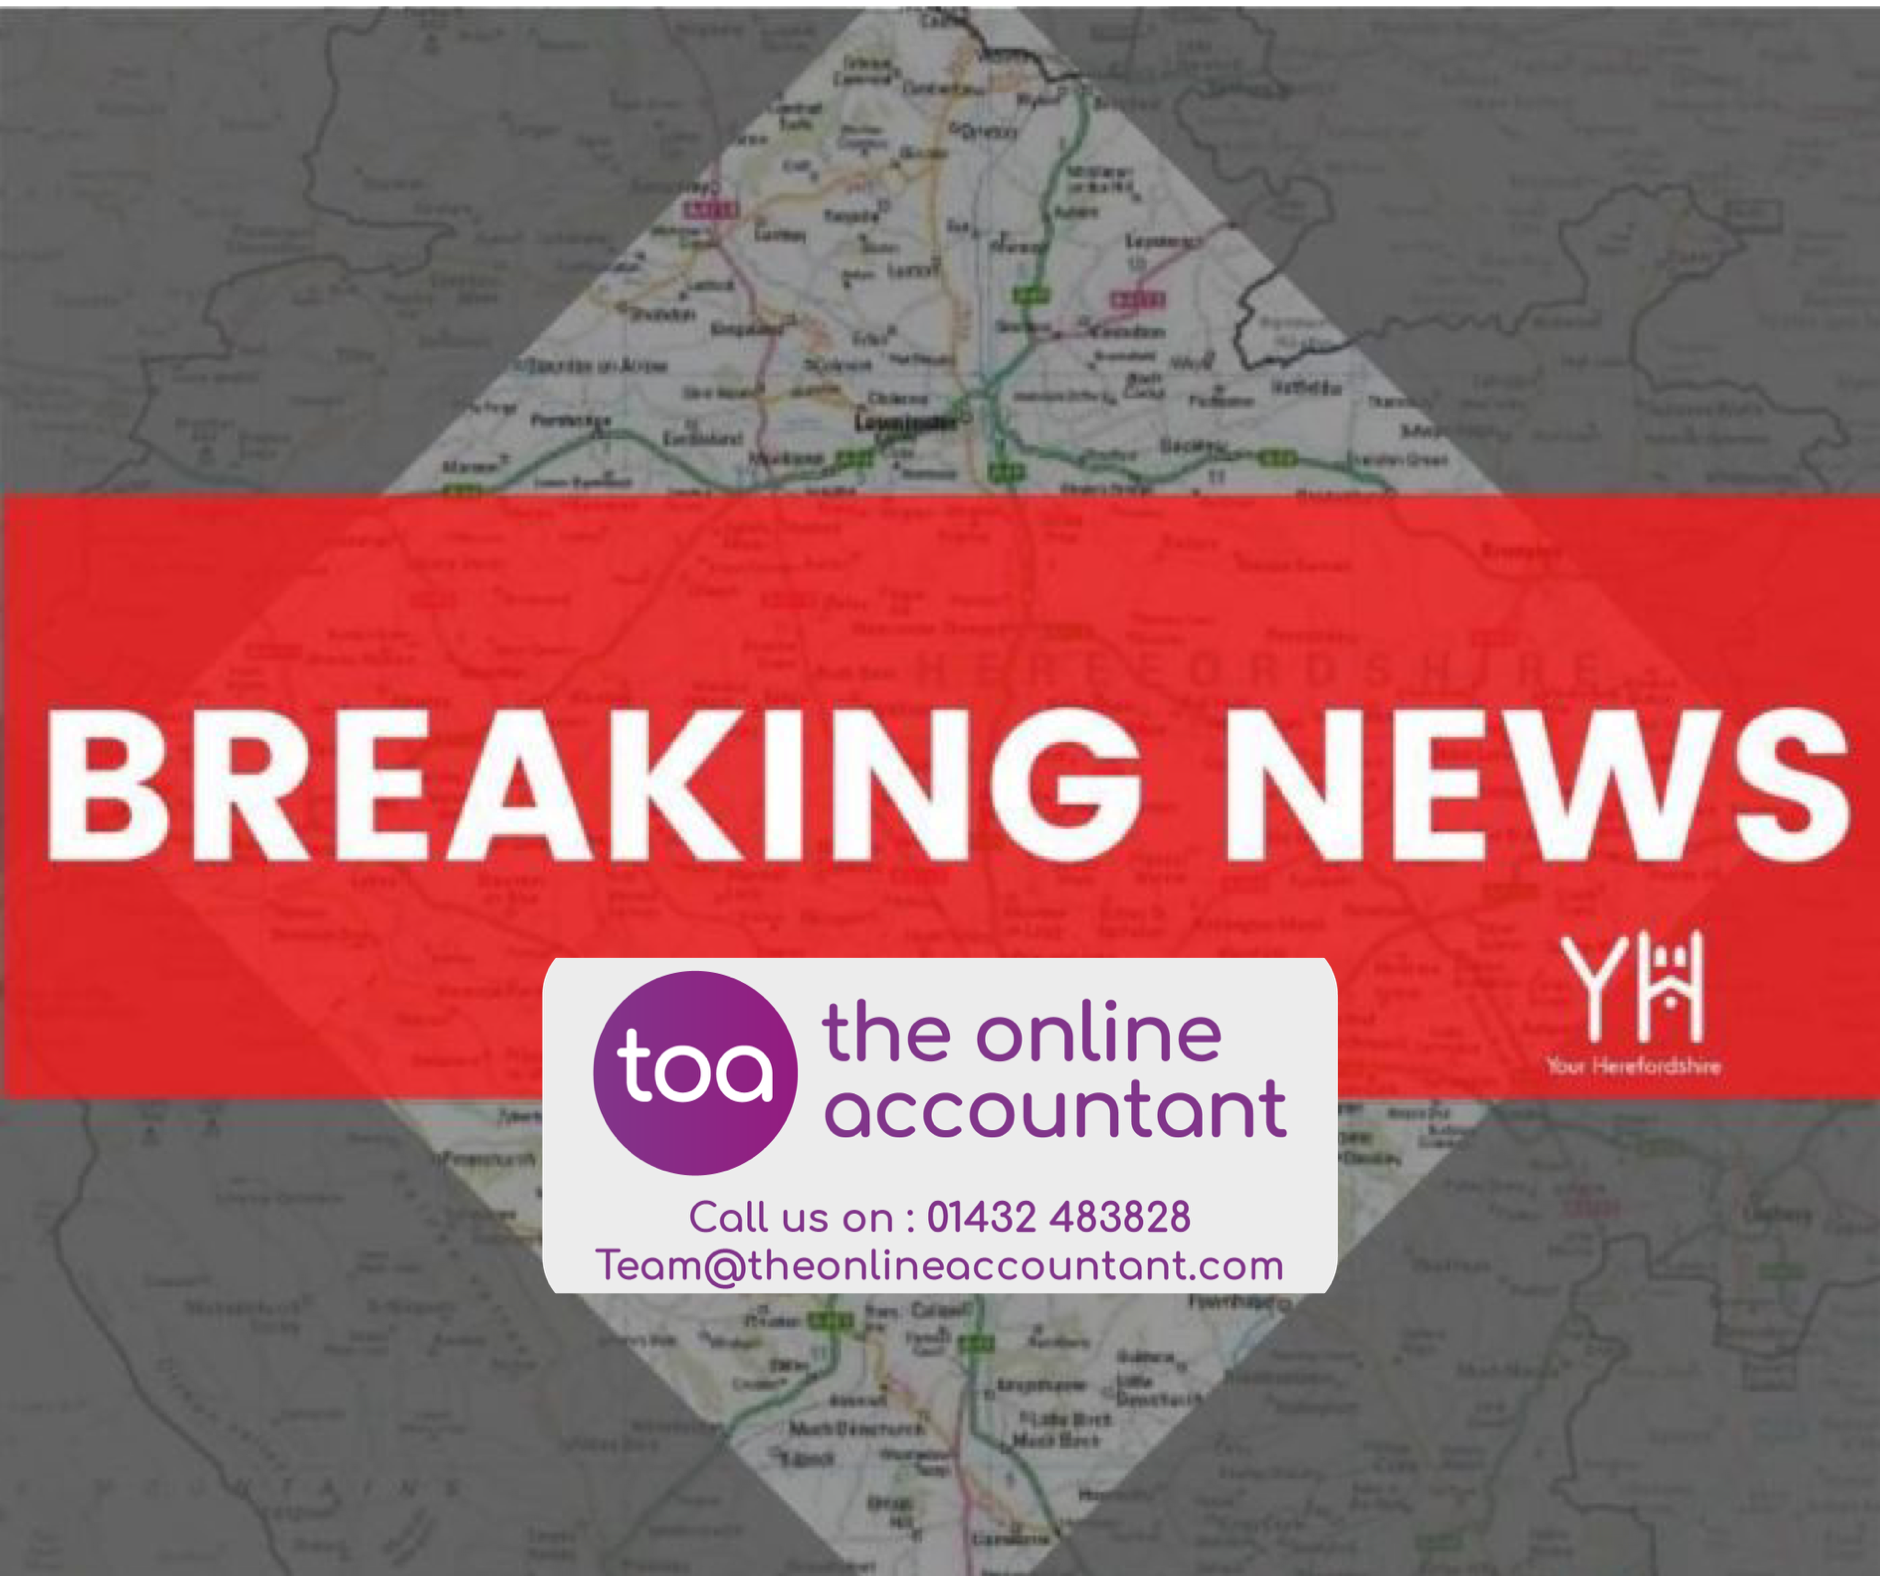 BREAKING | Royal Glamorgan Hospital reports major COVID-19 outbreak with 82 COVID-19 cases